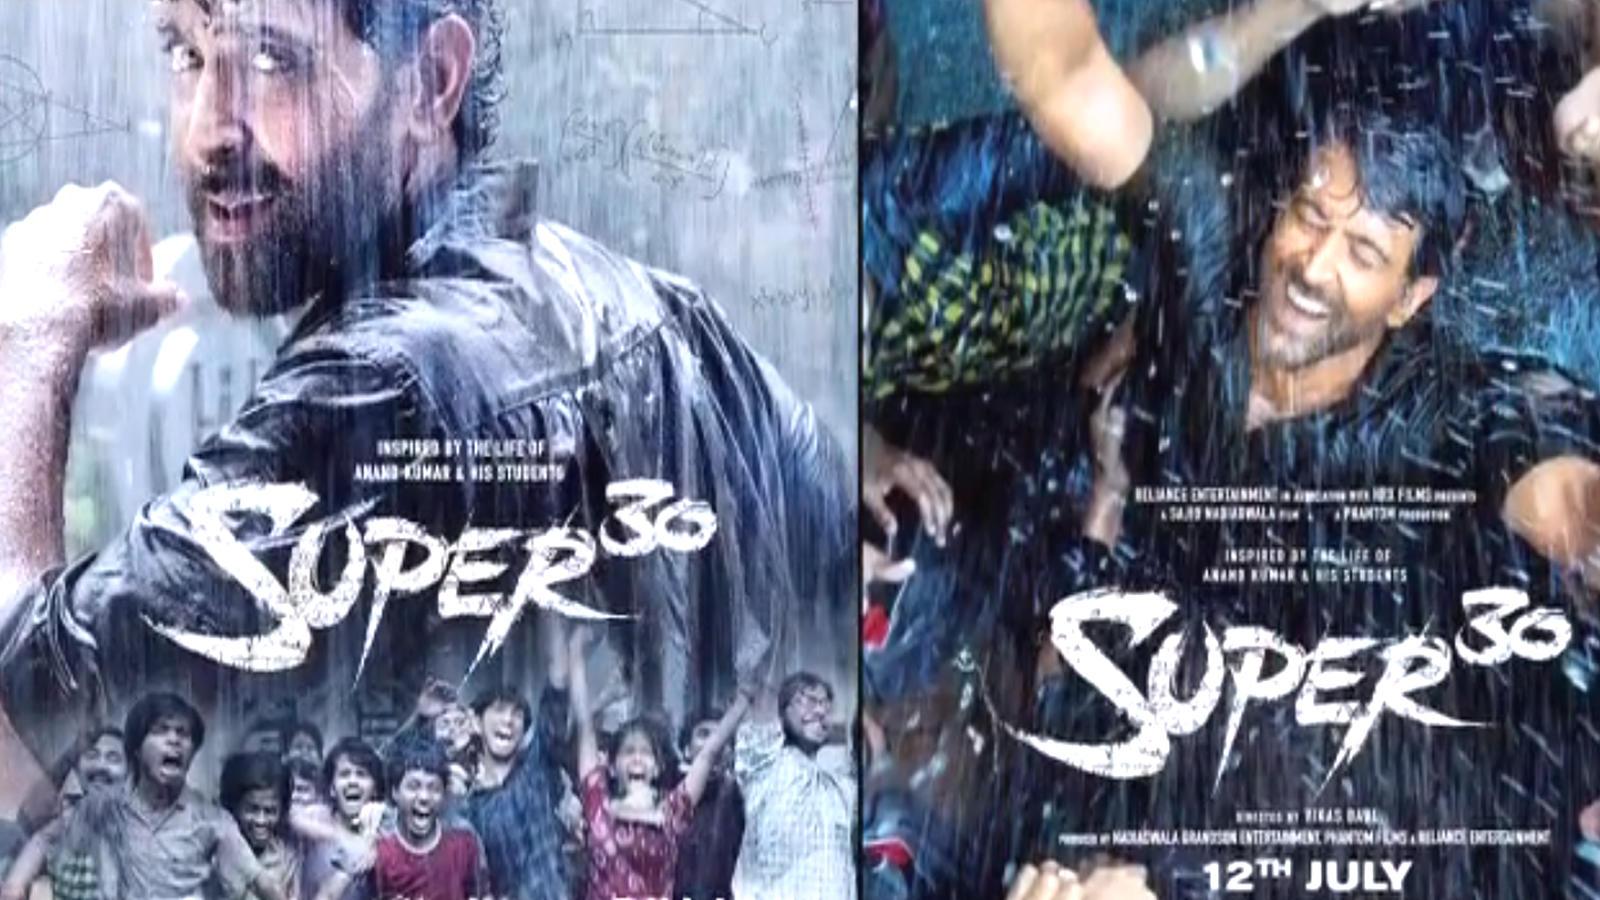 Super 30' trailer out: Hrithik Roshan turns mathematician Anand